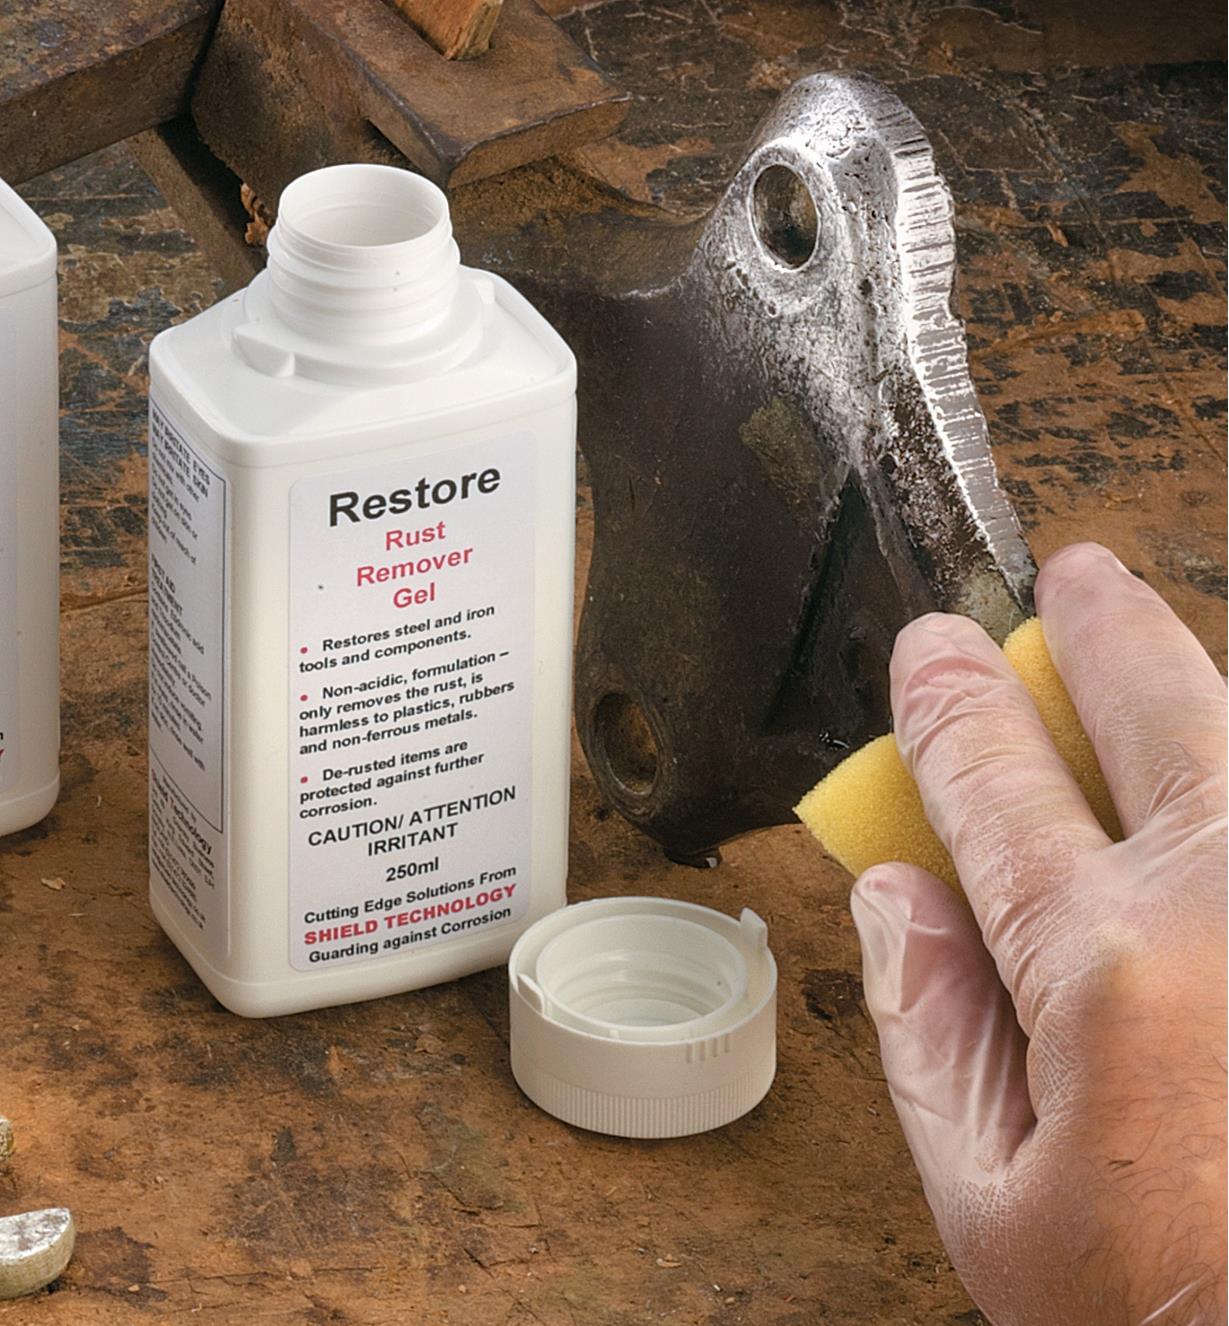 Wiping Rust Remover Gel on machinery